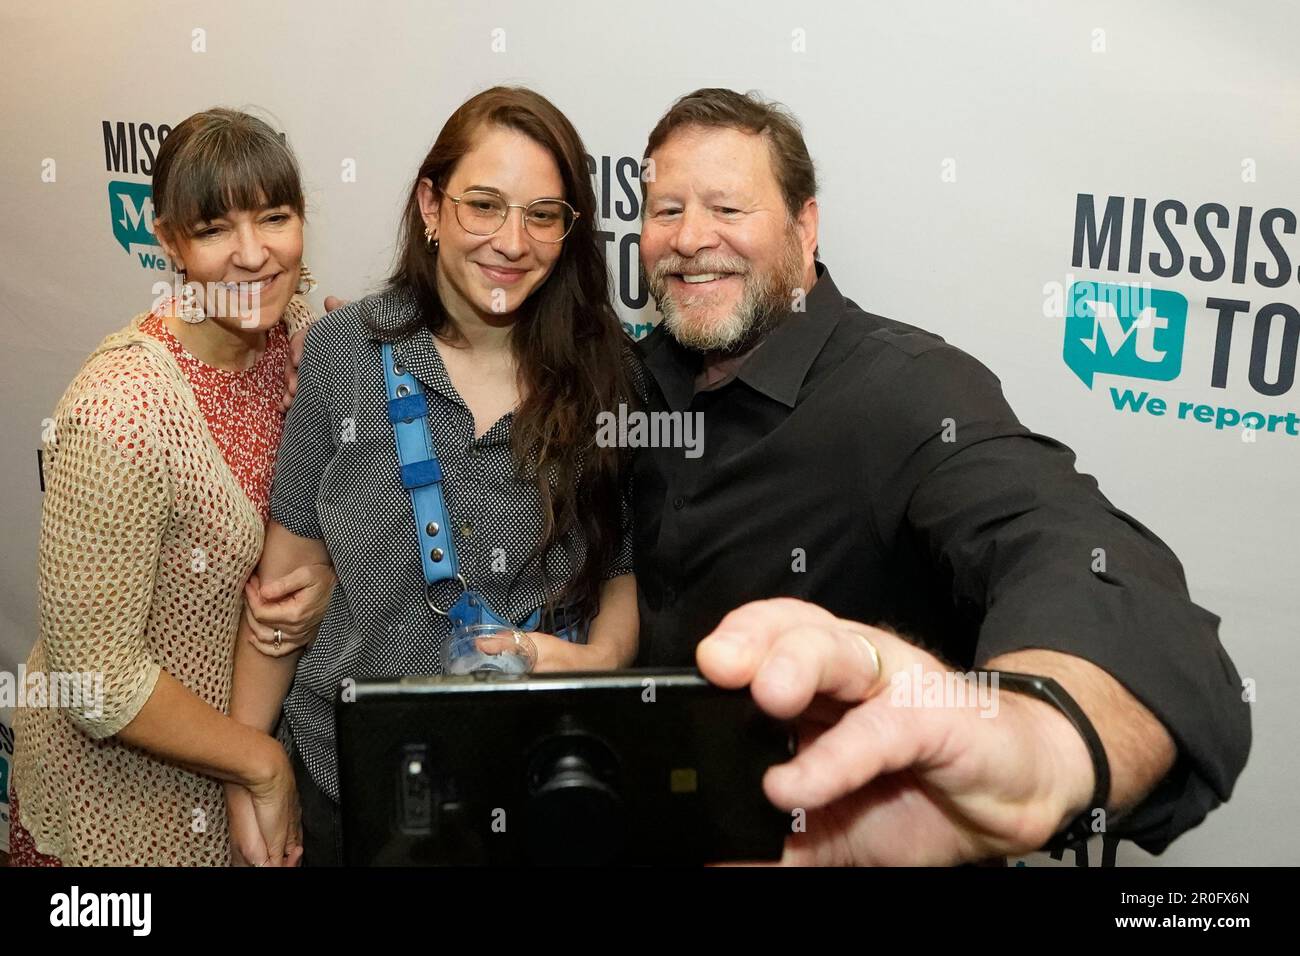 Mississippi Today reporter Anna Wolfe, center, her mother, Bethel Wolfe, left, and father, Chris Wolfe, take a selfie photograph after receiving news that she won the 2023 Pulitzer Prize for Local Reporting,